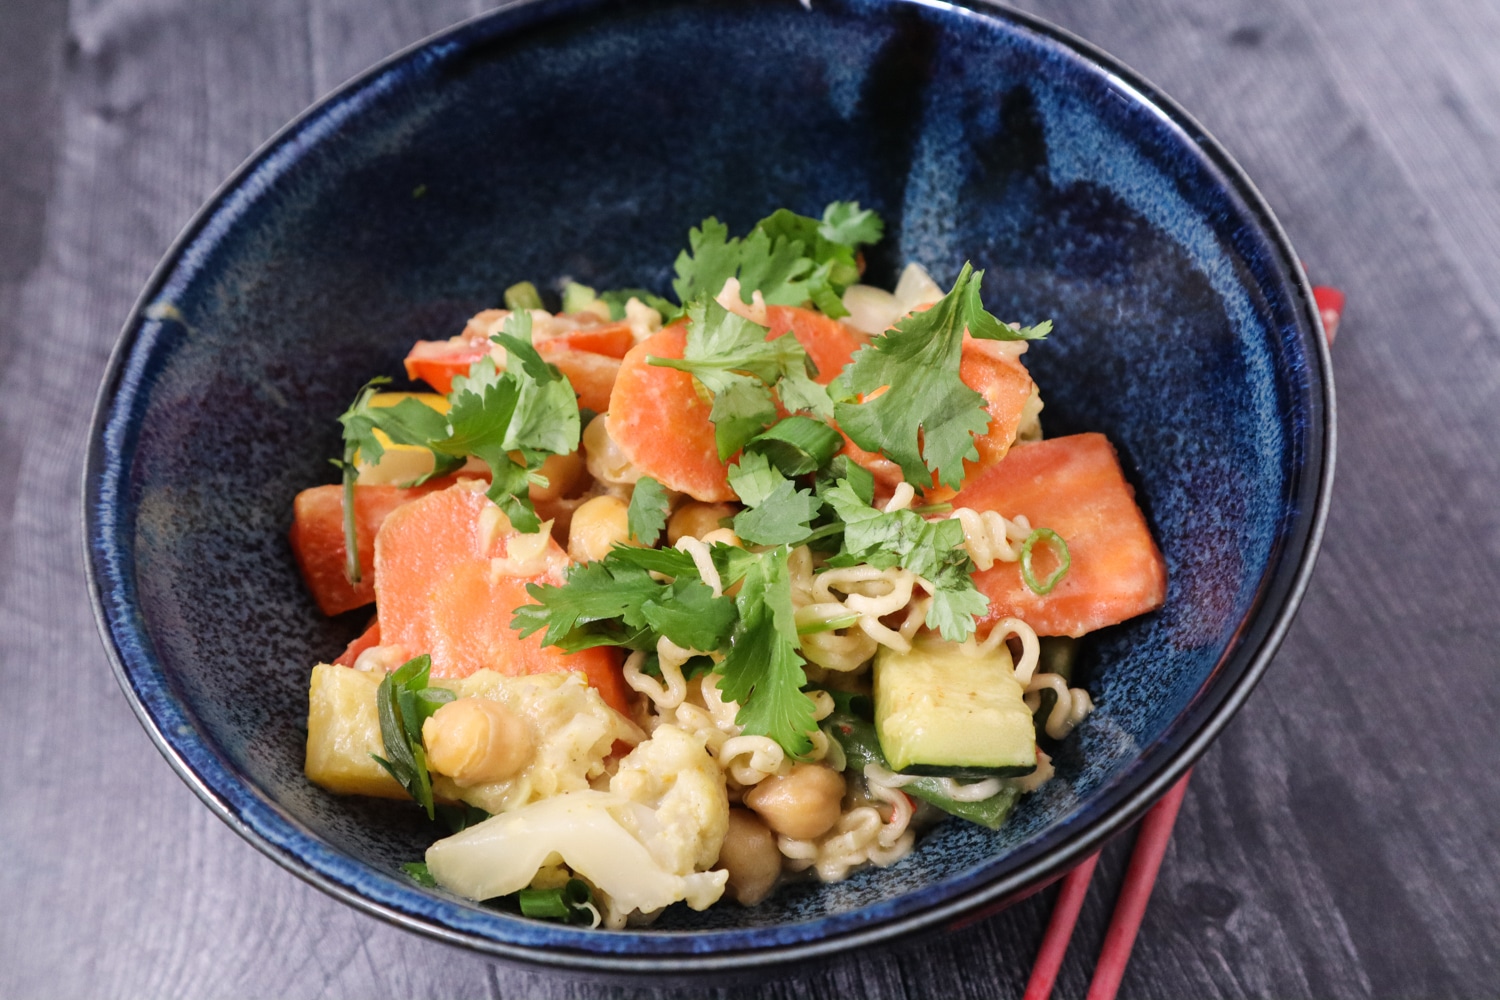 Veggie Thai Green Curry | Make Take-out at Home